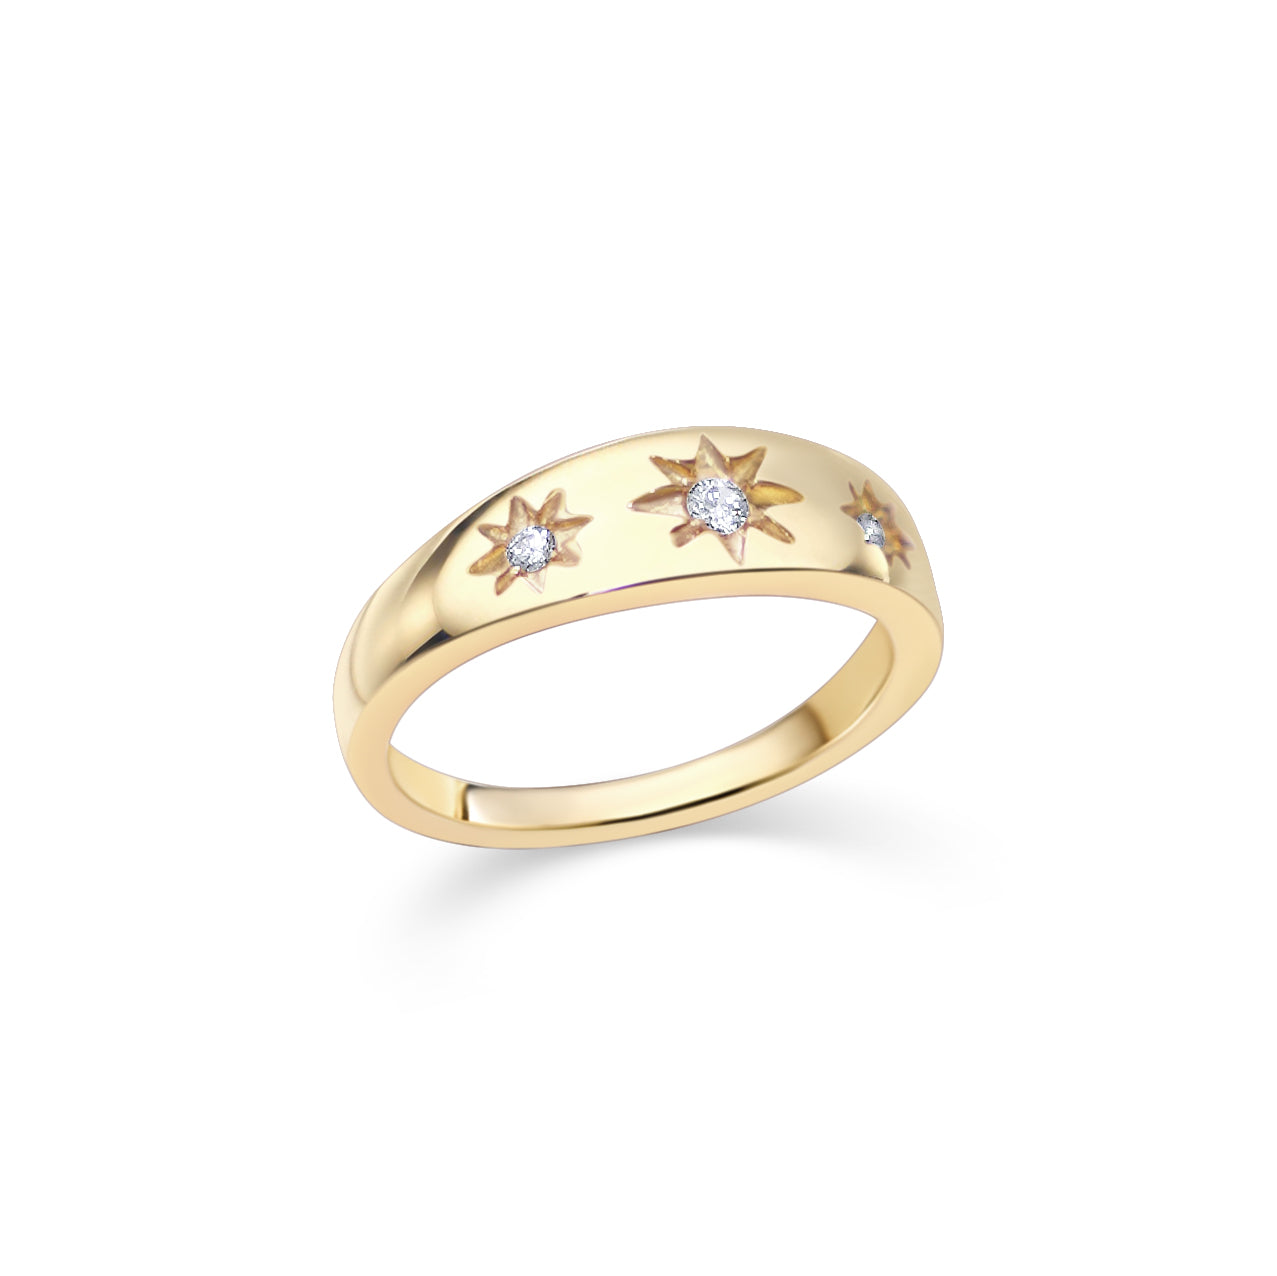 ORION RING